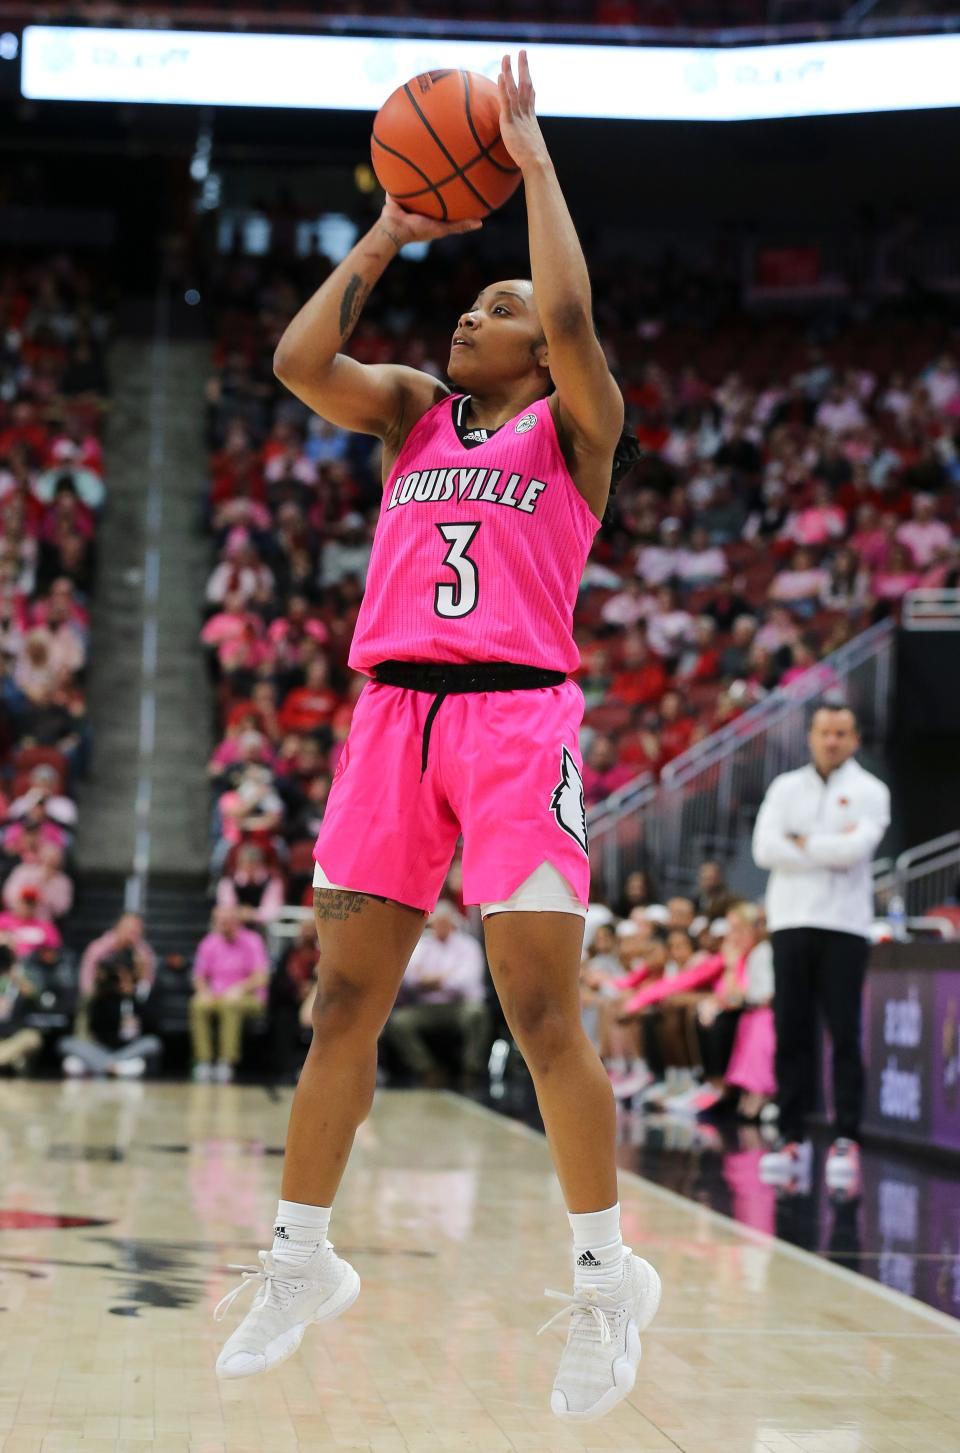 U of L's Chrislyn Carr (3) launches a three-point shot against North Carolina during their game at the Yum Center in Louisville, Ky. on Feb. 5, 2023.  U of L defeated No. 11 ranked UNC 62-55.